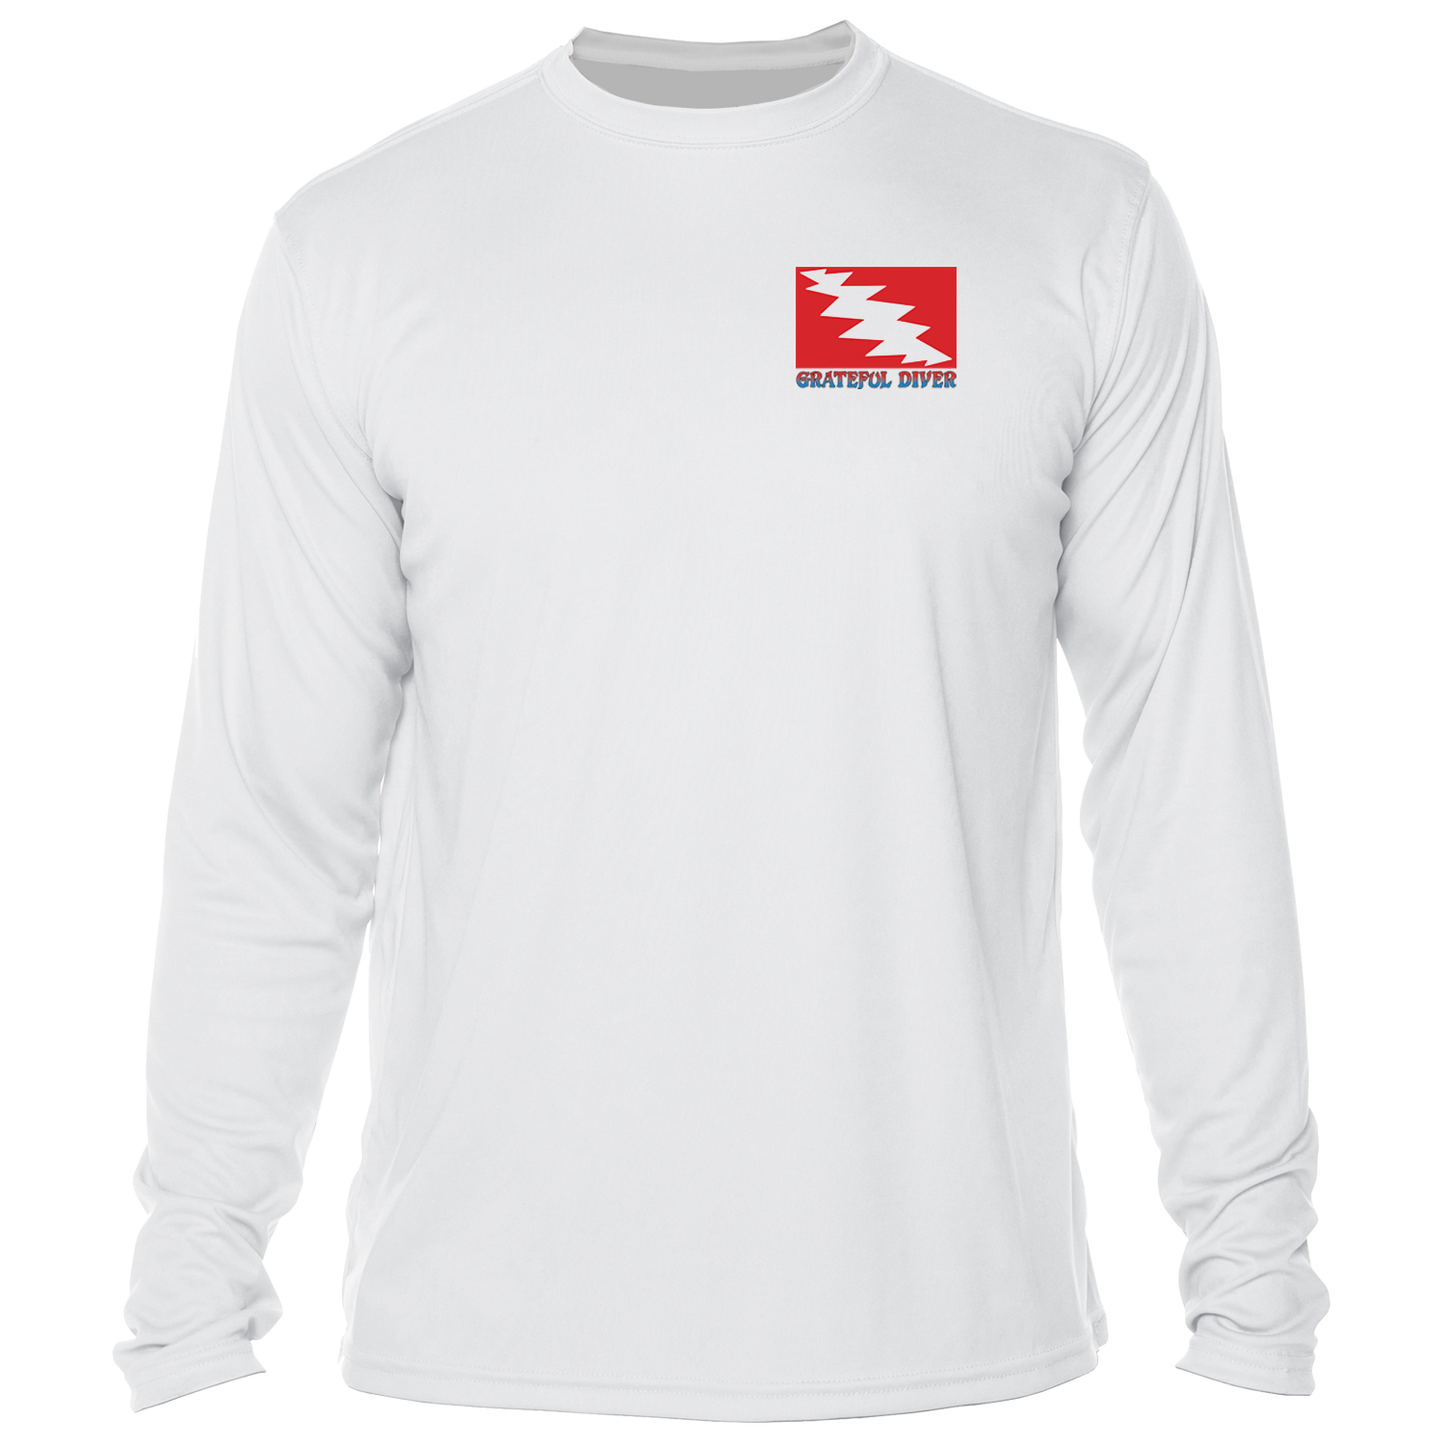 front of the Grateful Diver's Artist's Collection: Captain's Corner UV Shirt in white showing the classic dive flag logo